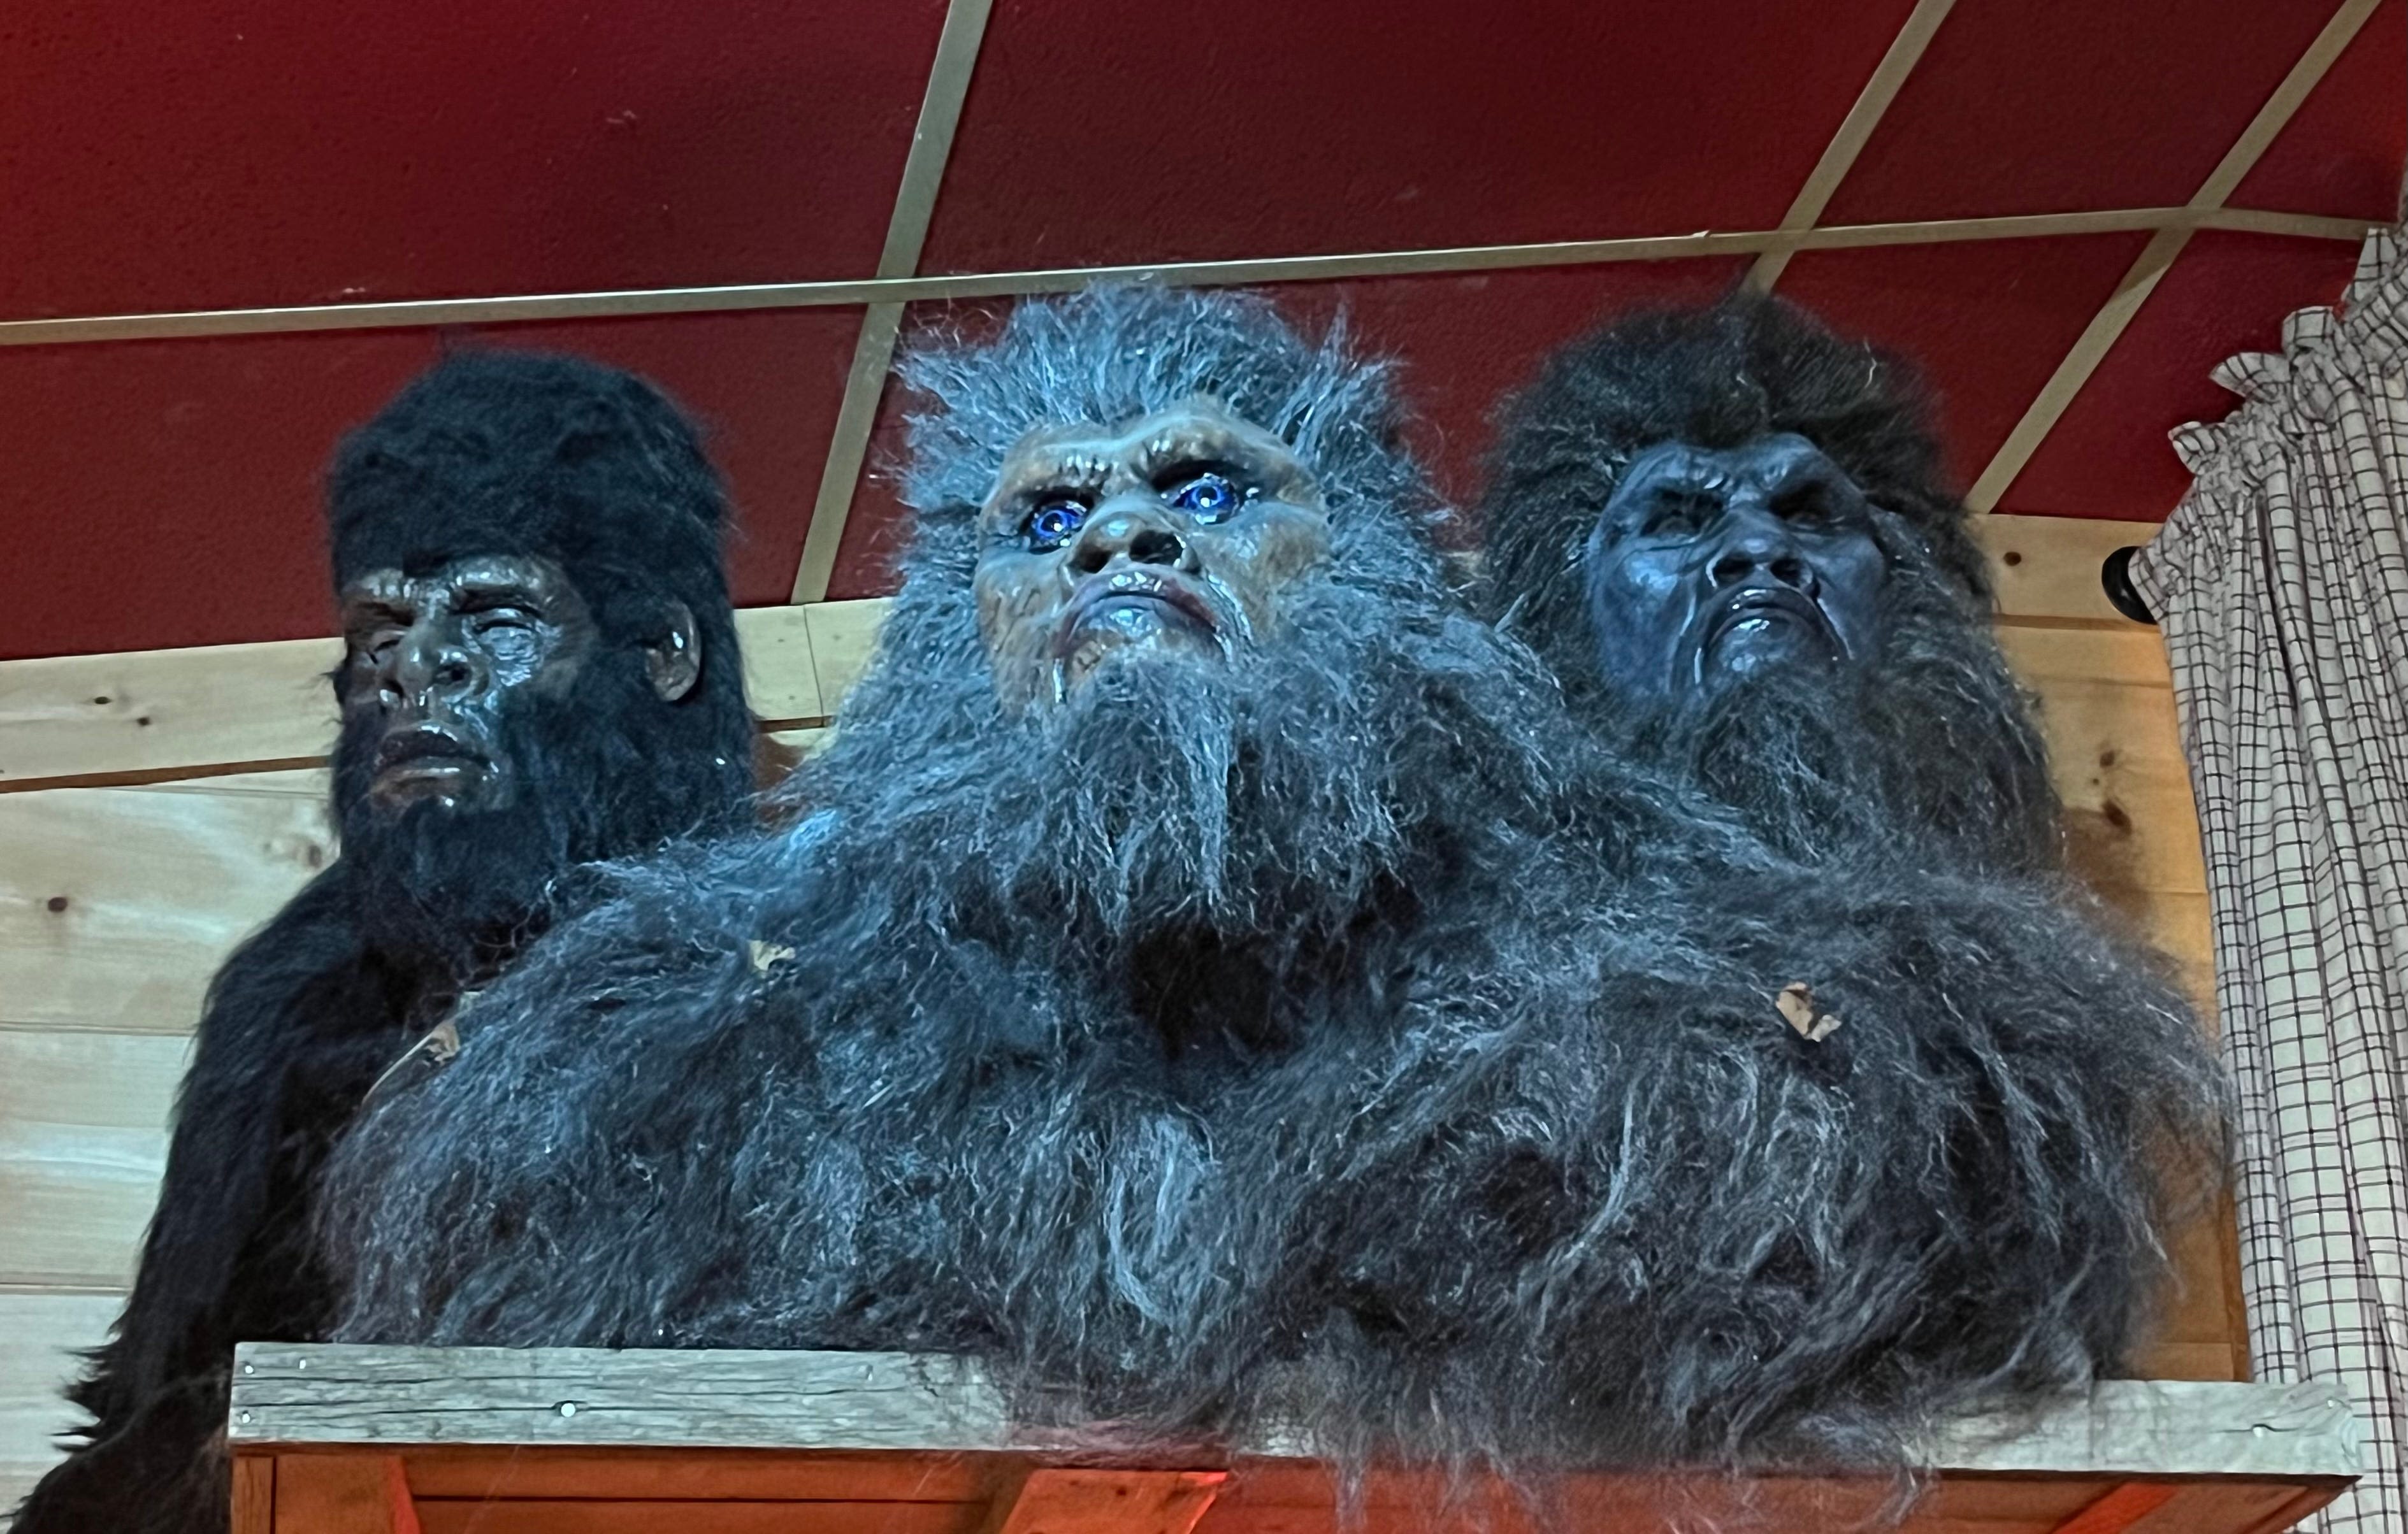 Stranger things in Georgia: Give your road trip some fun mystery at 'Expedition: Bigfoot!'